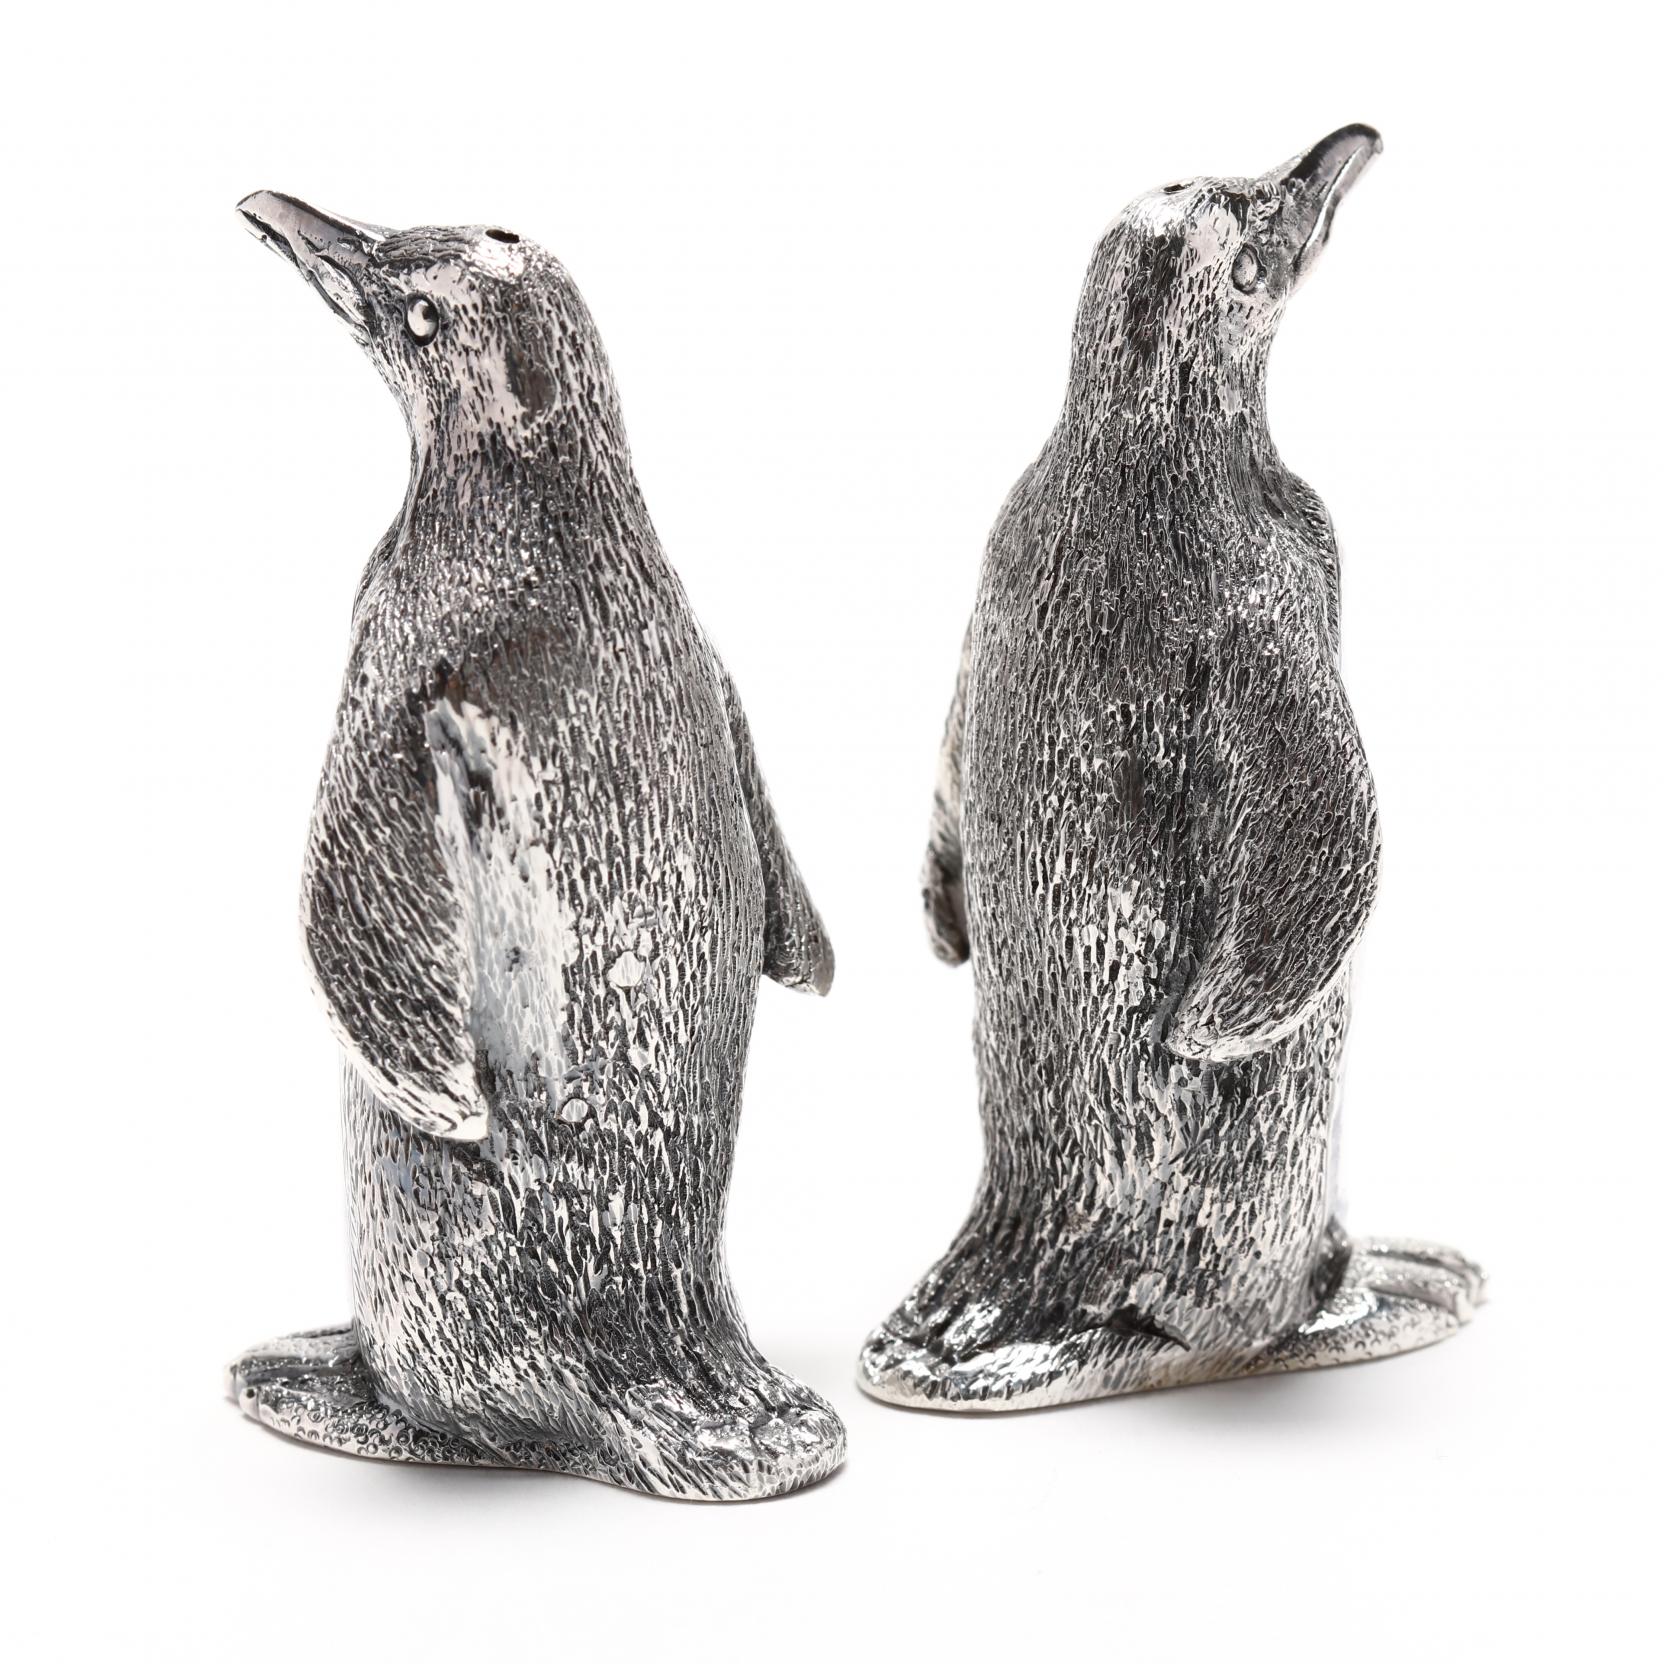 Tiffany & Co., A Set of Four Silver-Gilt Frog Salt and Pepper Shakers,  19671